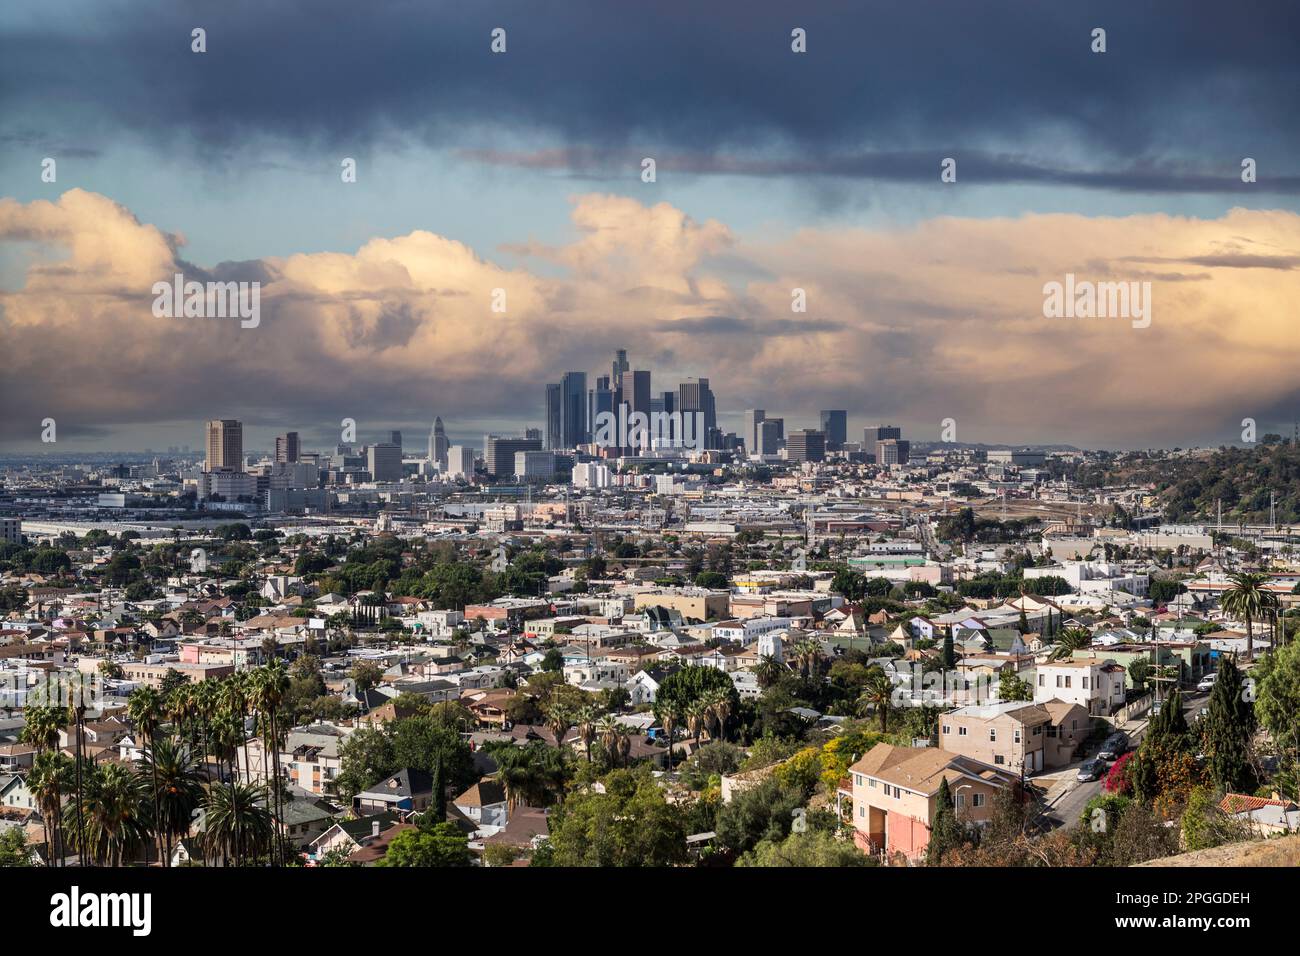 Hilltop view of downtown Los Angeles California with storm clouds. Stock Photo